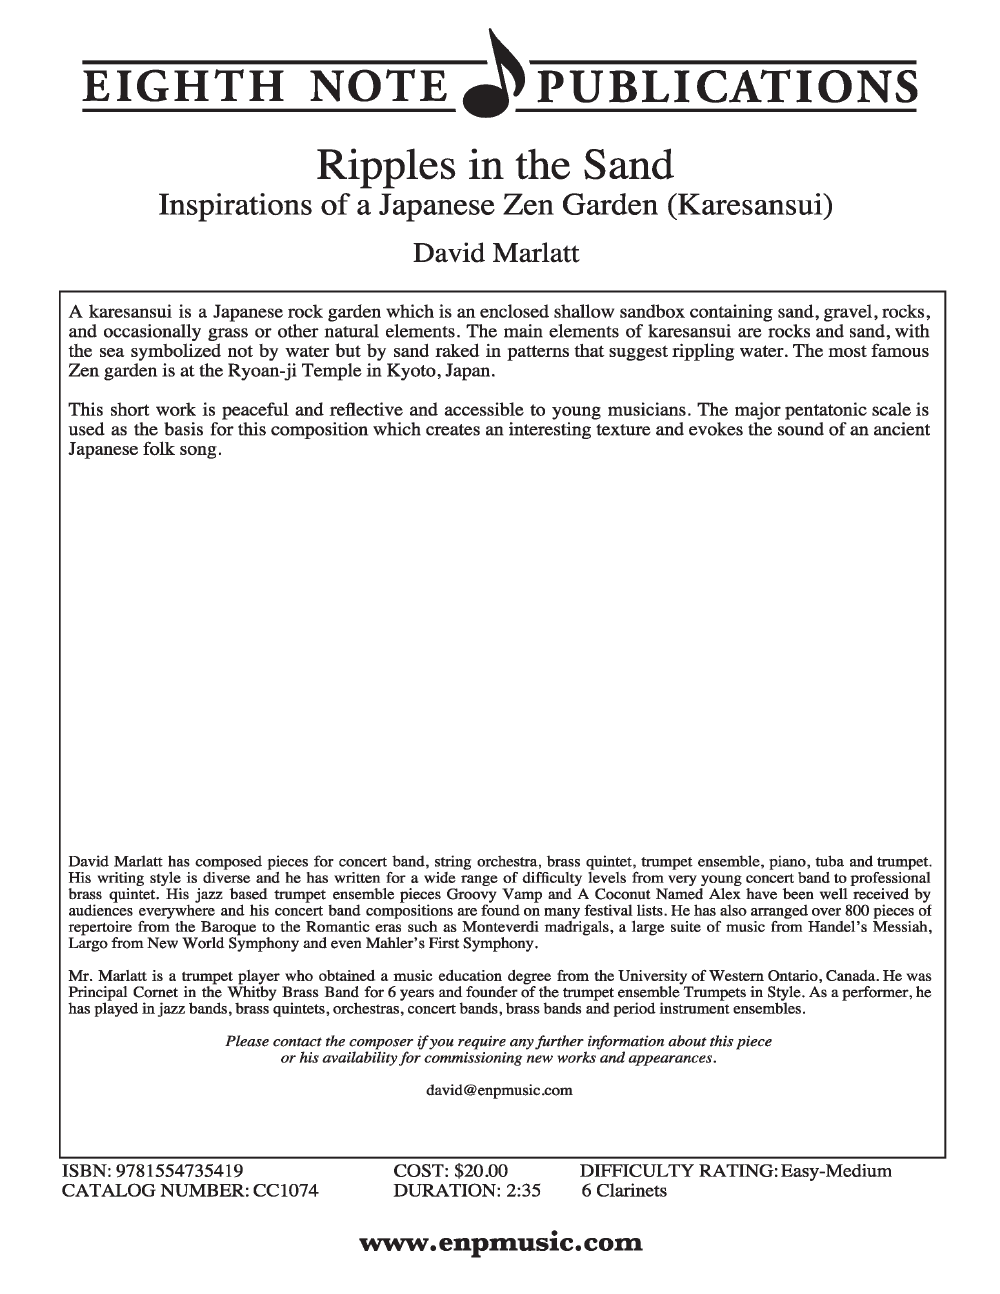 RIPPLES IN THE SAND CLARINET ENSEMBLE